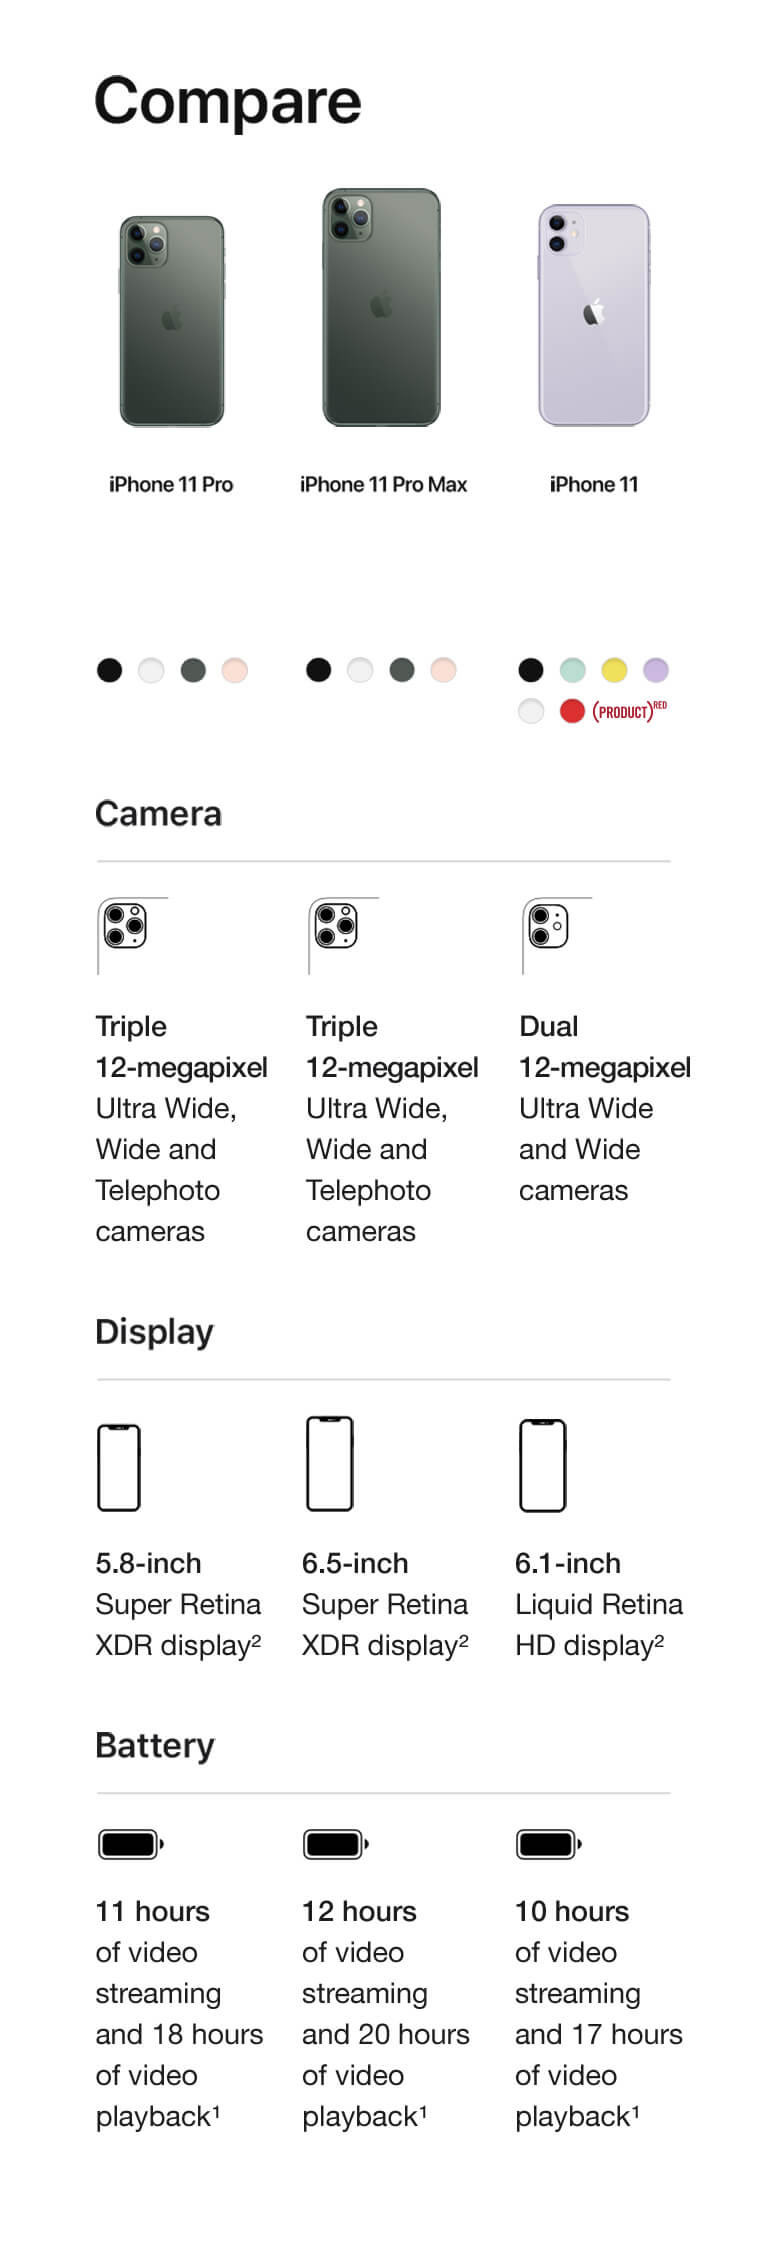 Compare iPhones. Compare cameras. iPhone 11 Pro. Triple 12-megapixel Ultra Wide, Wide and Telephoto cameras. iPhone 11 Pro Max. Triple 12-megapixel Ultra Wide, Wide and Telephoto cameras. iPhone 11. Dual 12-megapixel Ultra Wide and Wide cameras. Compare displays. iPhone 11 Pro. 5.8-inch Super Retina XDR display. iPhone 11 Pro Max. 6.5-inch Super Retina XDR display. iPhone 11. 6.1-inch Liquid Retina HD display. Compare Batteries. iPhone 11 Pro. 11 hours of video streaming and 18 hours of video playback. iPhone 11 Pro Max. 12 hours of video streaming and 20 hours of video playback. iPhone 11. 10 hours of video streaming and 17 hours of video playback. Refer to device disclaimers below.